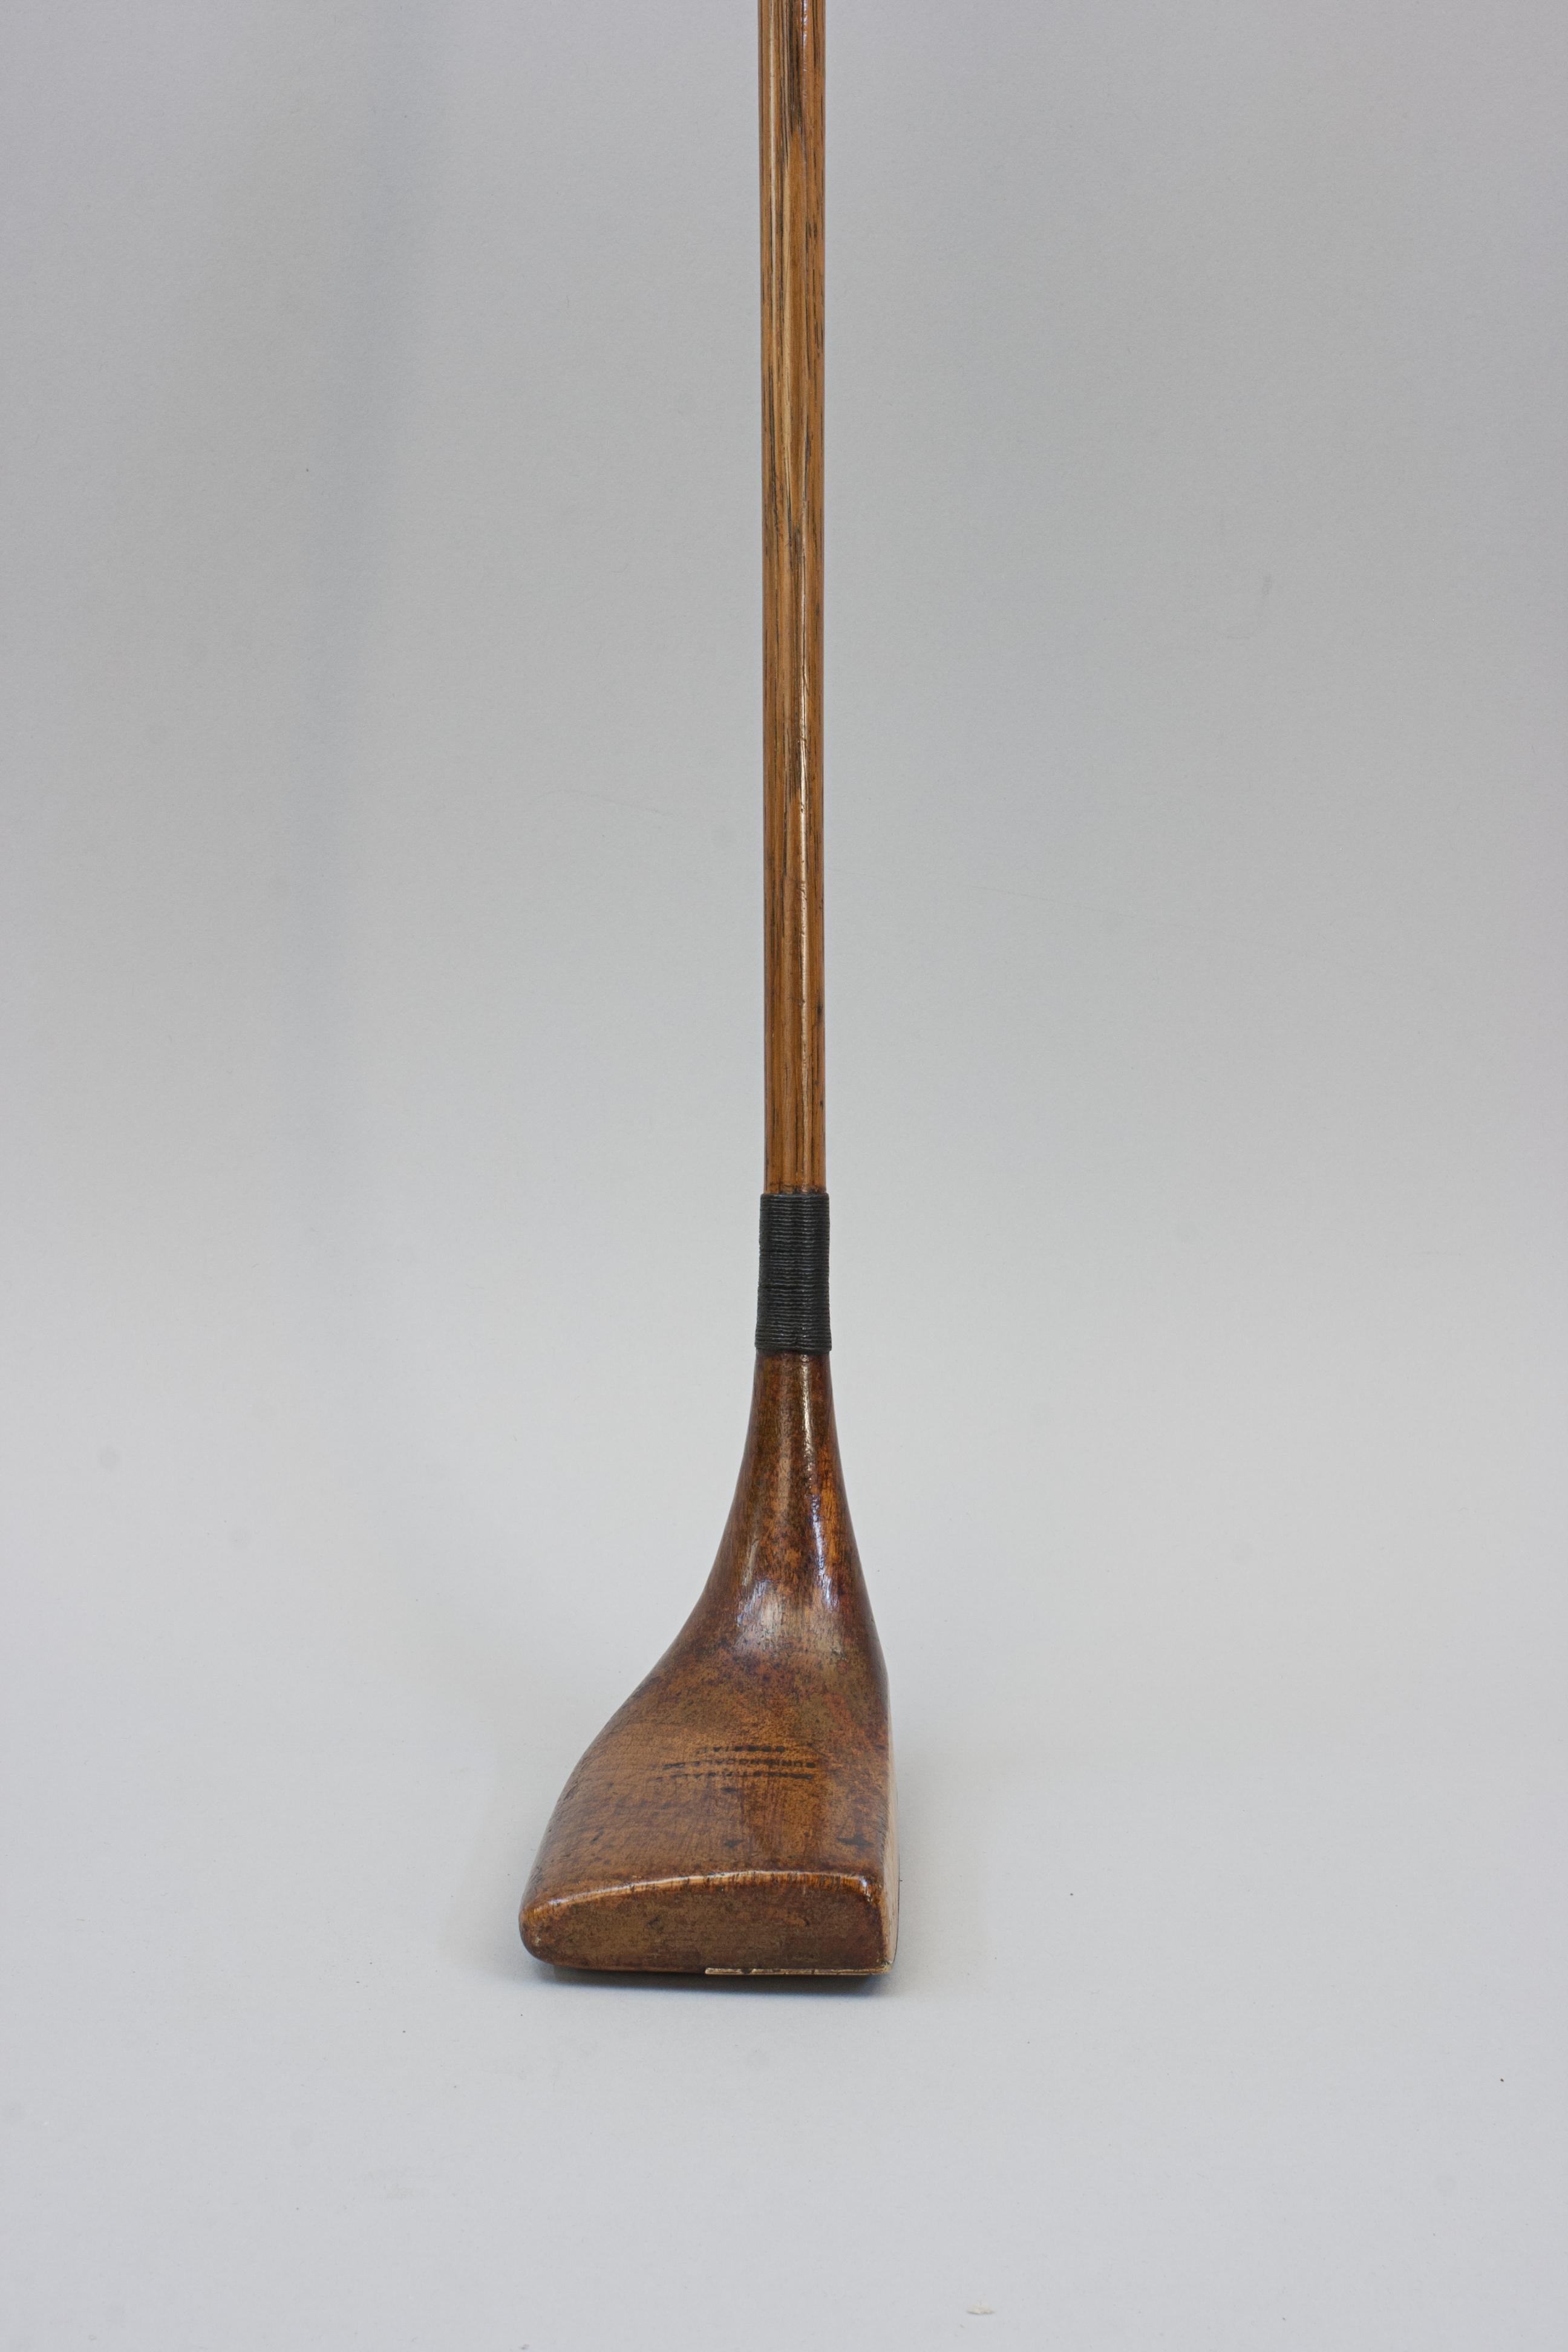 Golf Club, Gassiat Type Putter by Ernest F. Sales of Sunningdale In Good Condition For Sale In Oxfordshire, GB